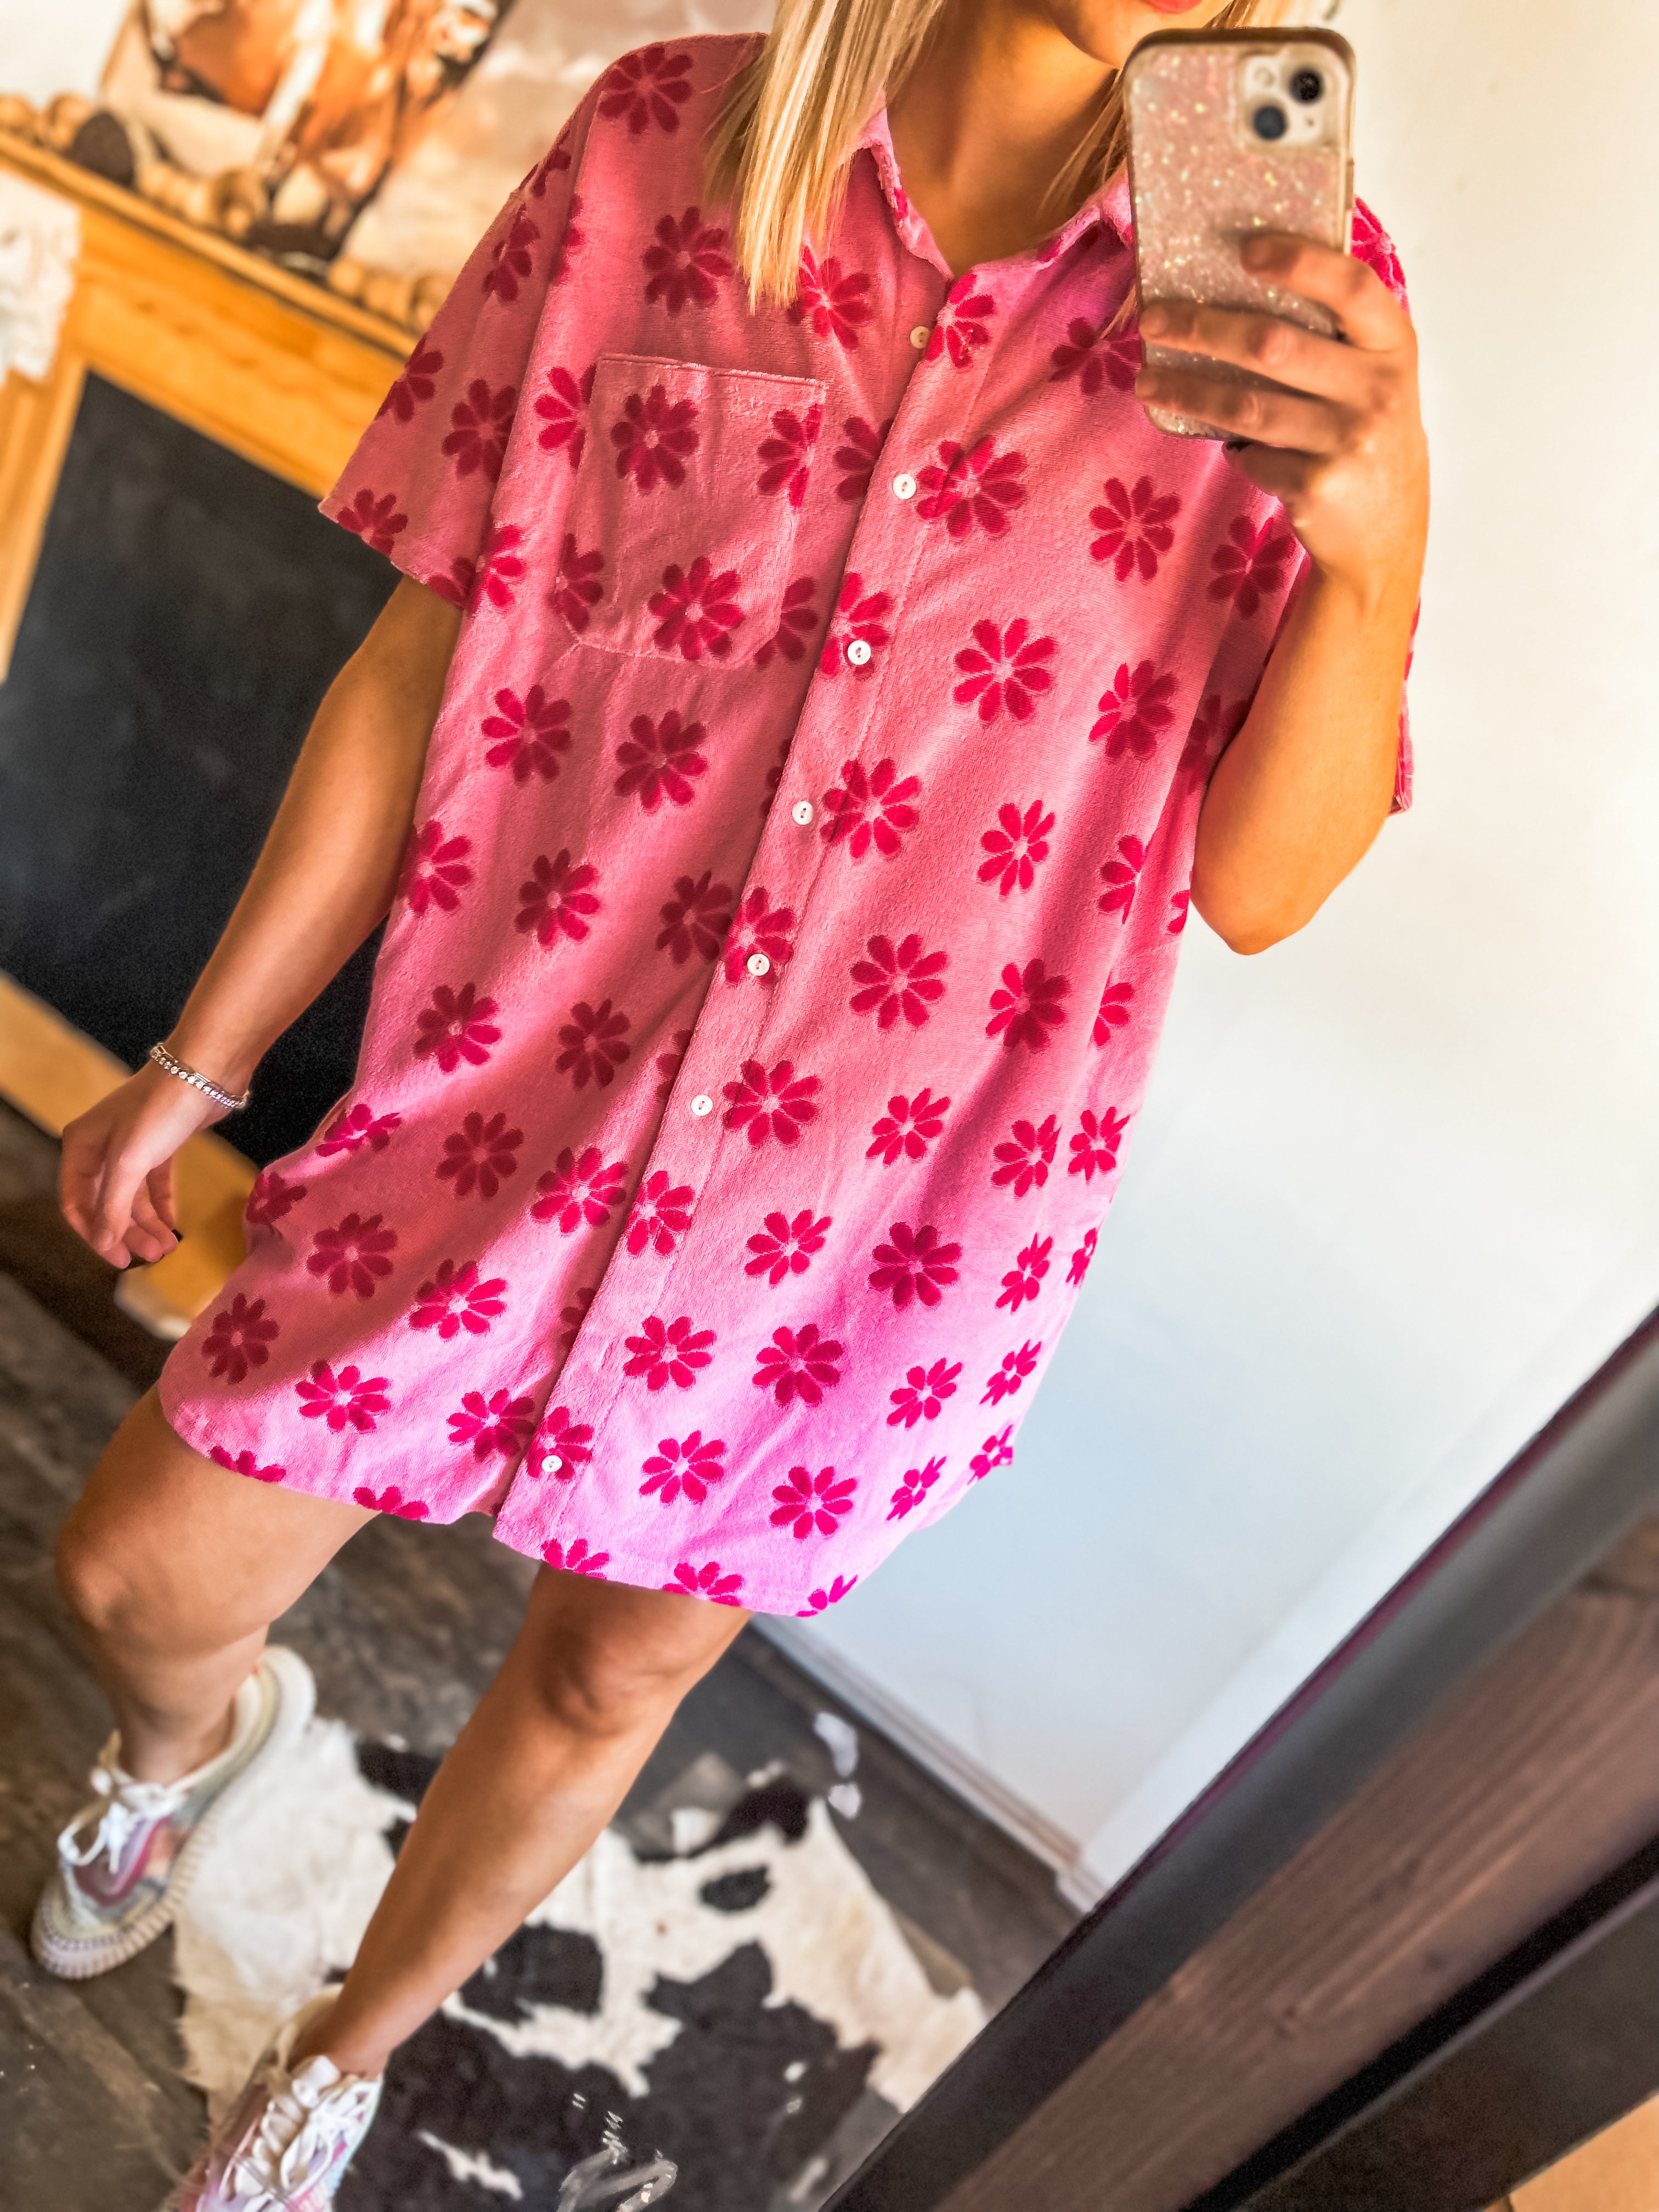 Terry cloth pink floral dress